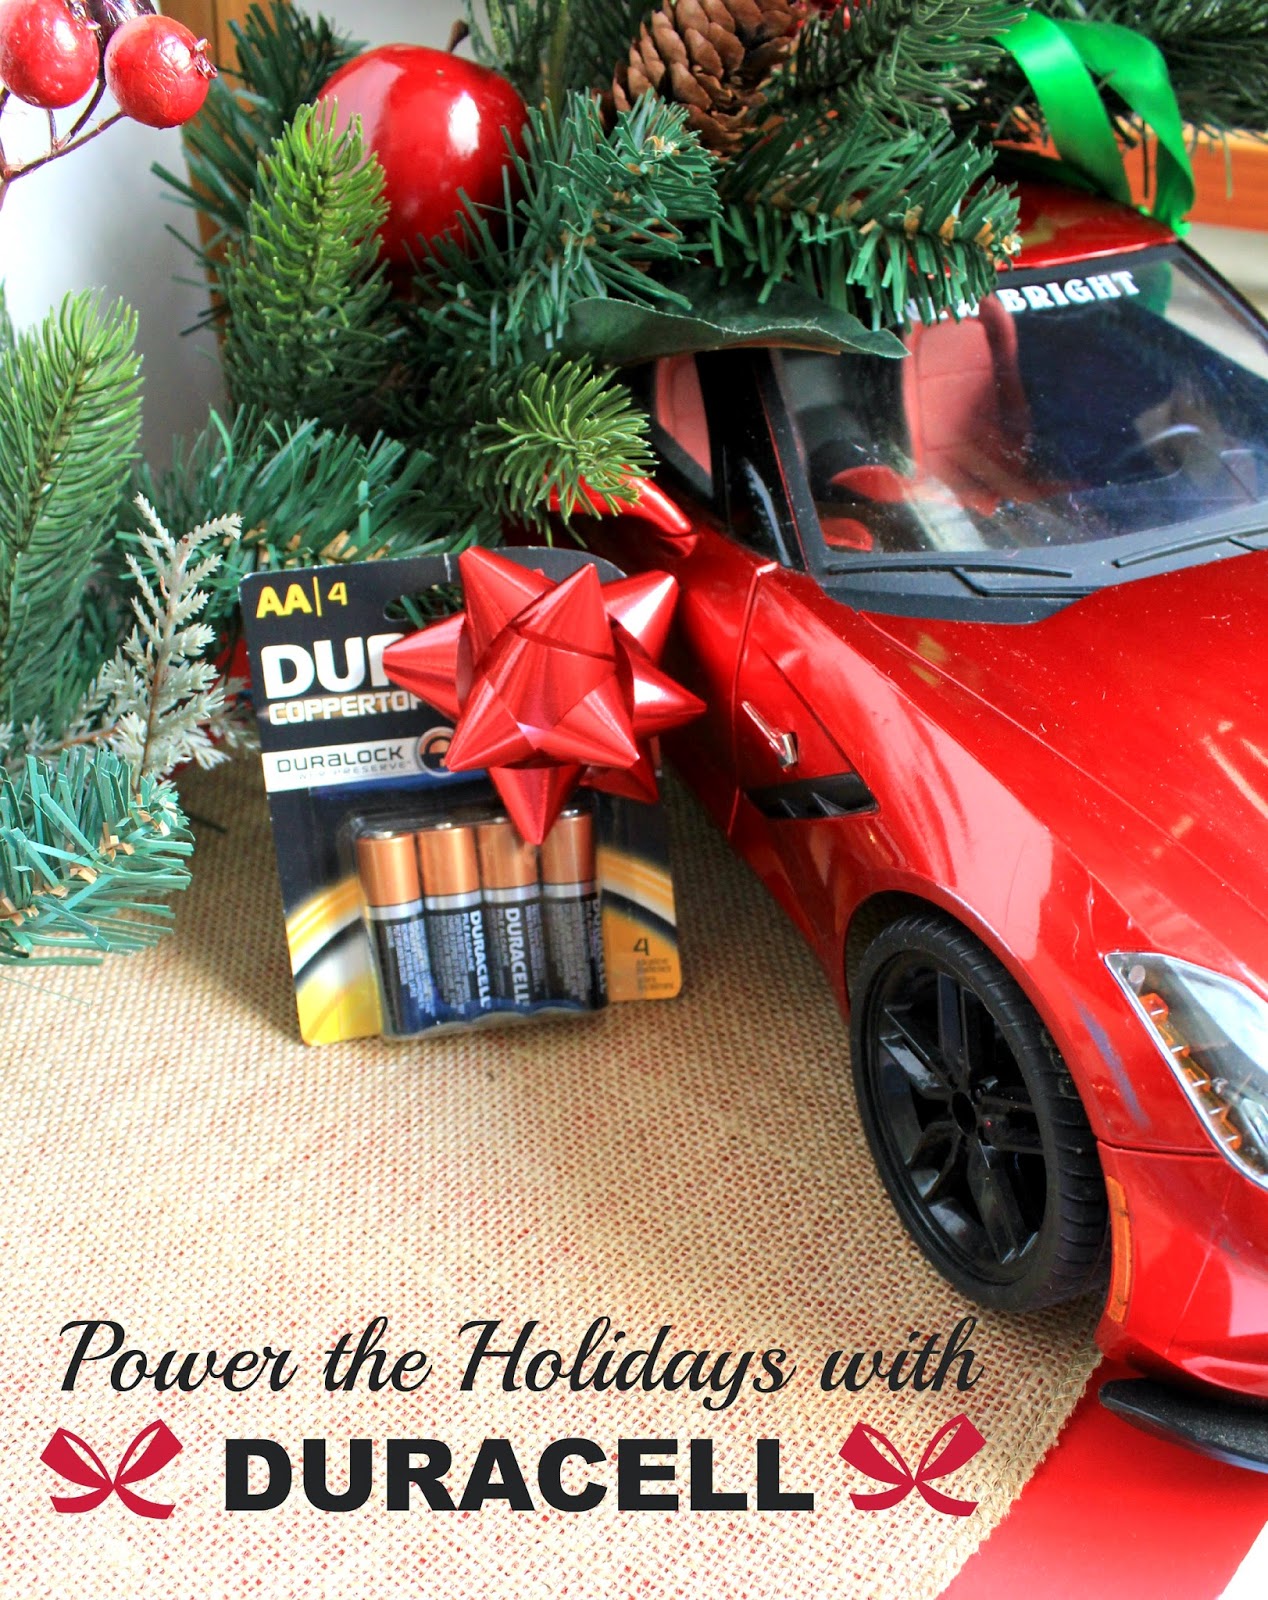 Don't forget the batteries! Power the holidays with Duracell! #PowerTheHolidays #sponsored